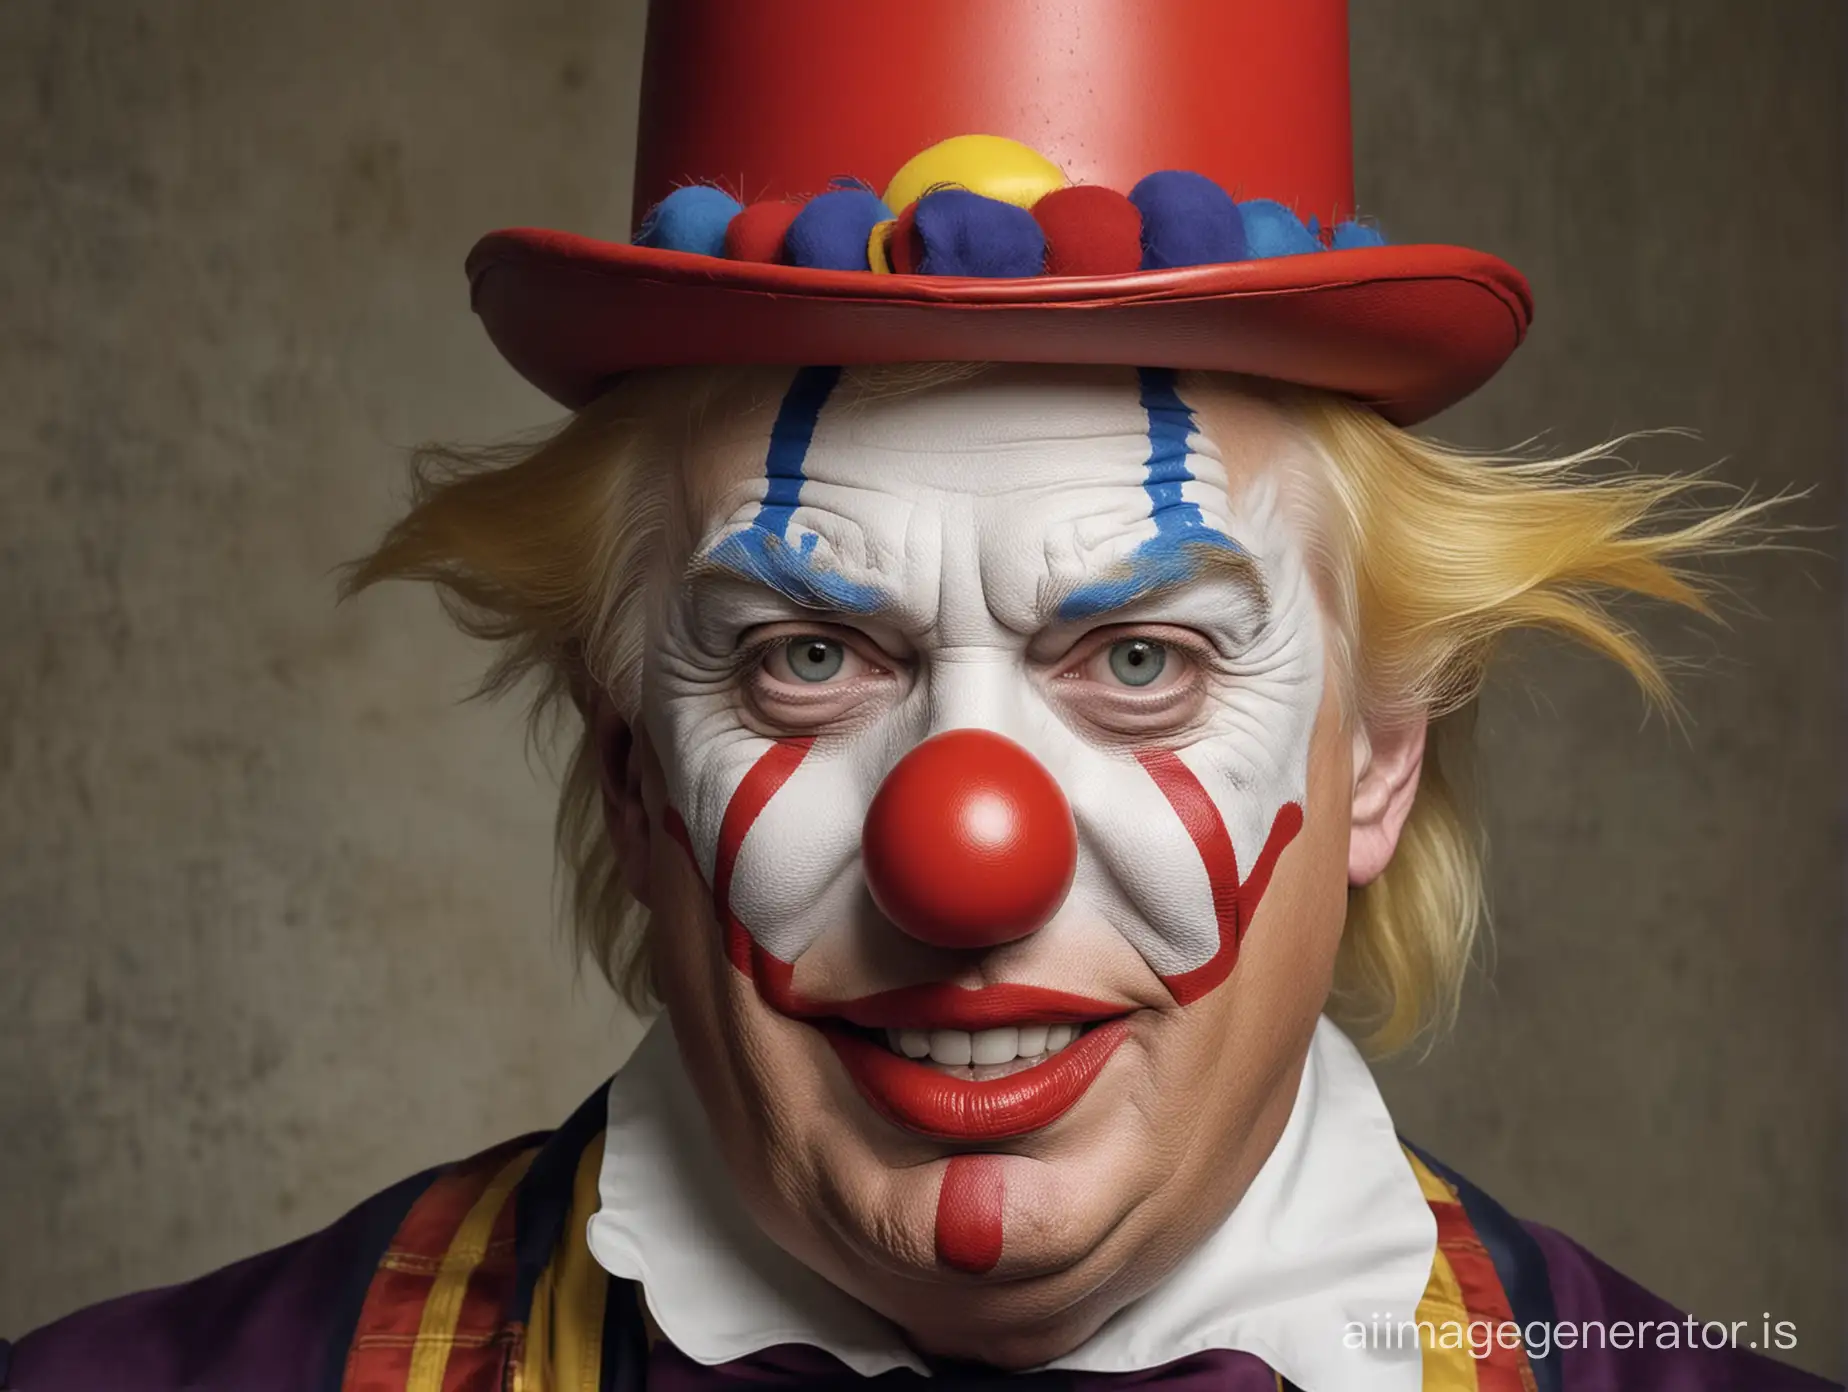 Donald-Trump-Costumed-as-a-Clown-with-Colorful-Outfit-and-Jester-Hat